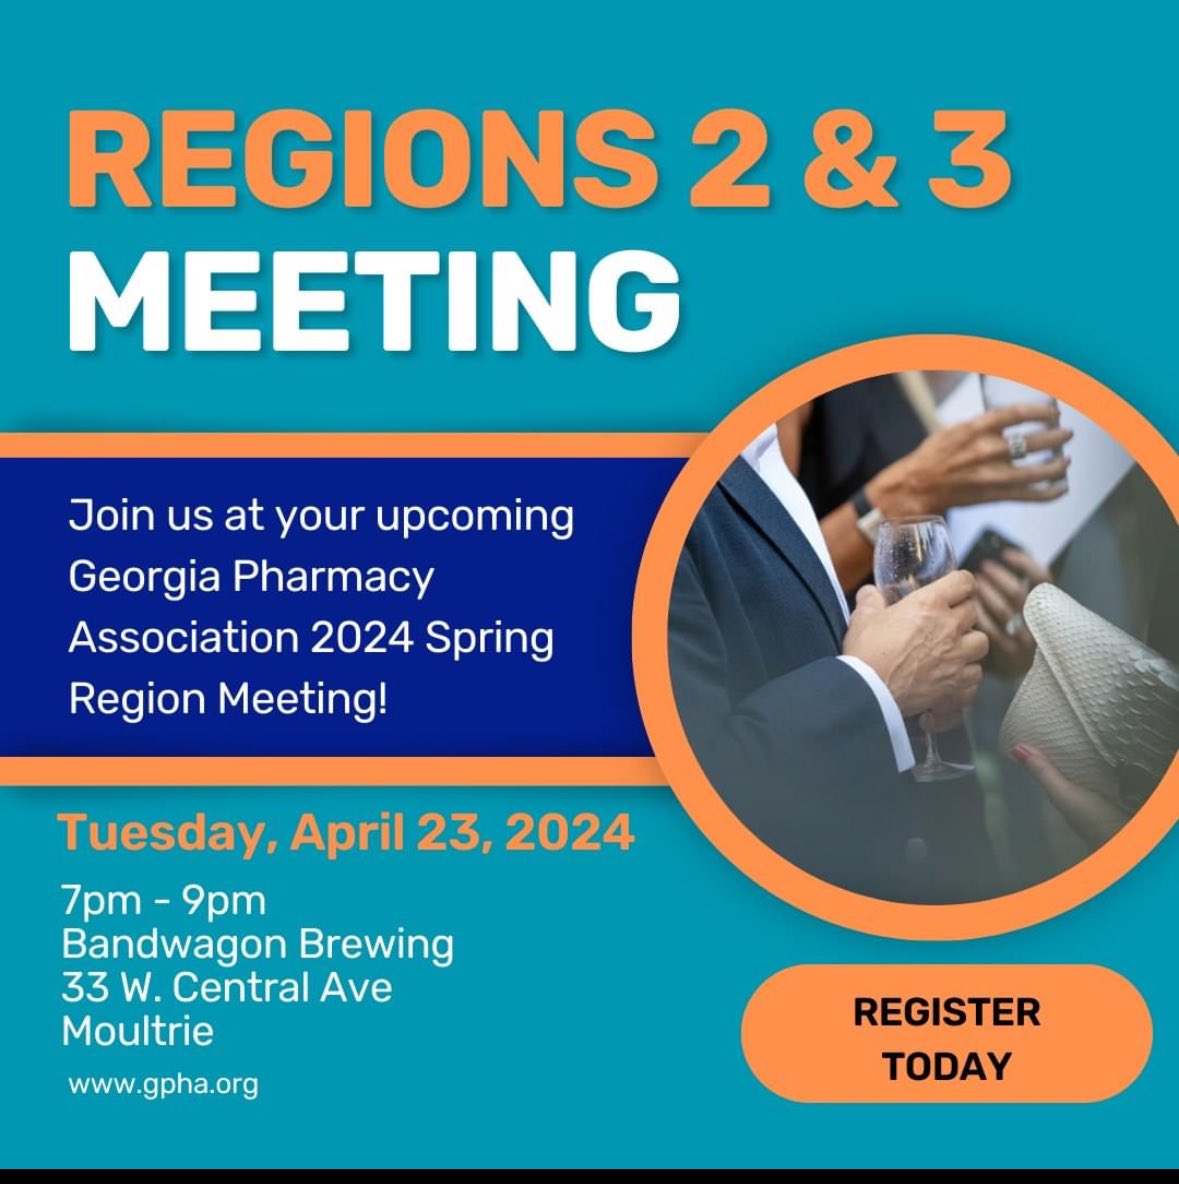 TO ALL MY PHARMACY FRIENDS,  do not miss your Region Meetings! If you are in Region 2 and 3, join us Tuesday night at Bandwagon Brewing in Moultrie. Come join up with your fellow pharmacists, meet the new CEO, and share your thoughts on GPhA!! Register at gpha.org/regionmeetings